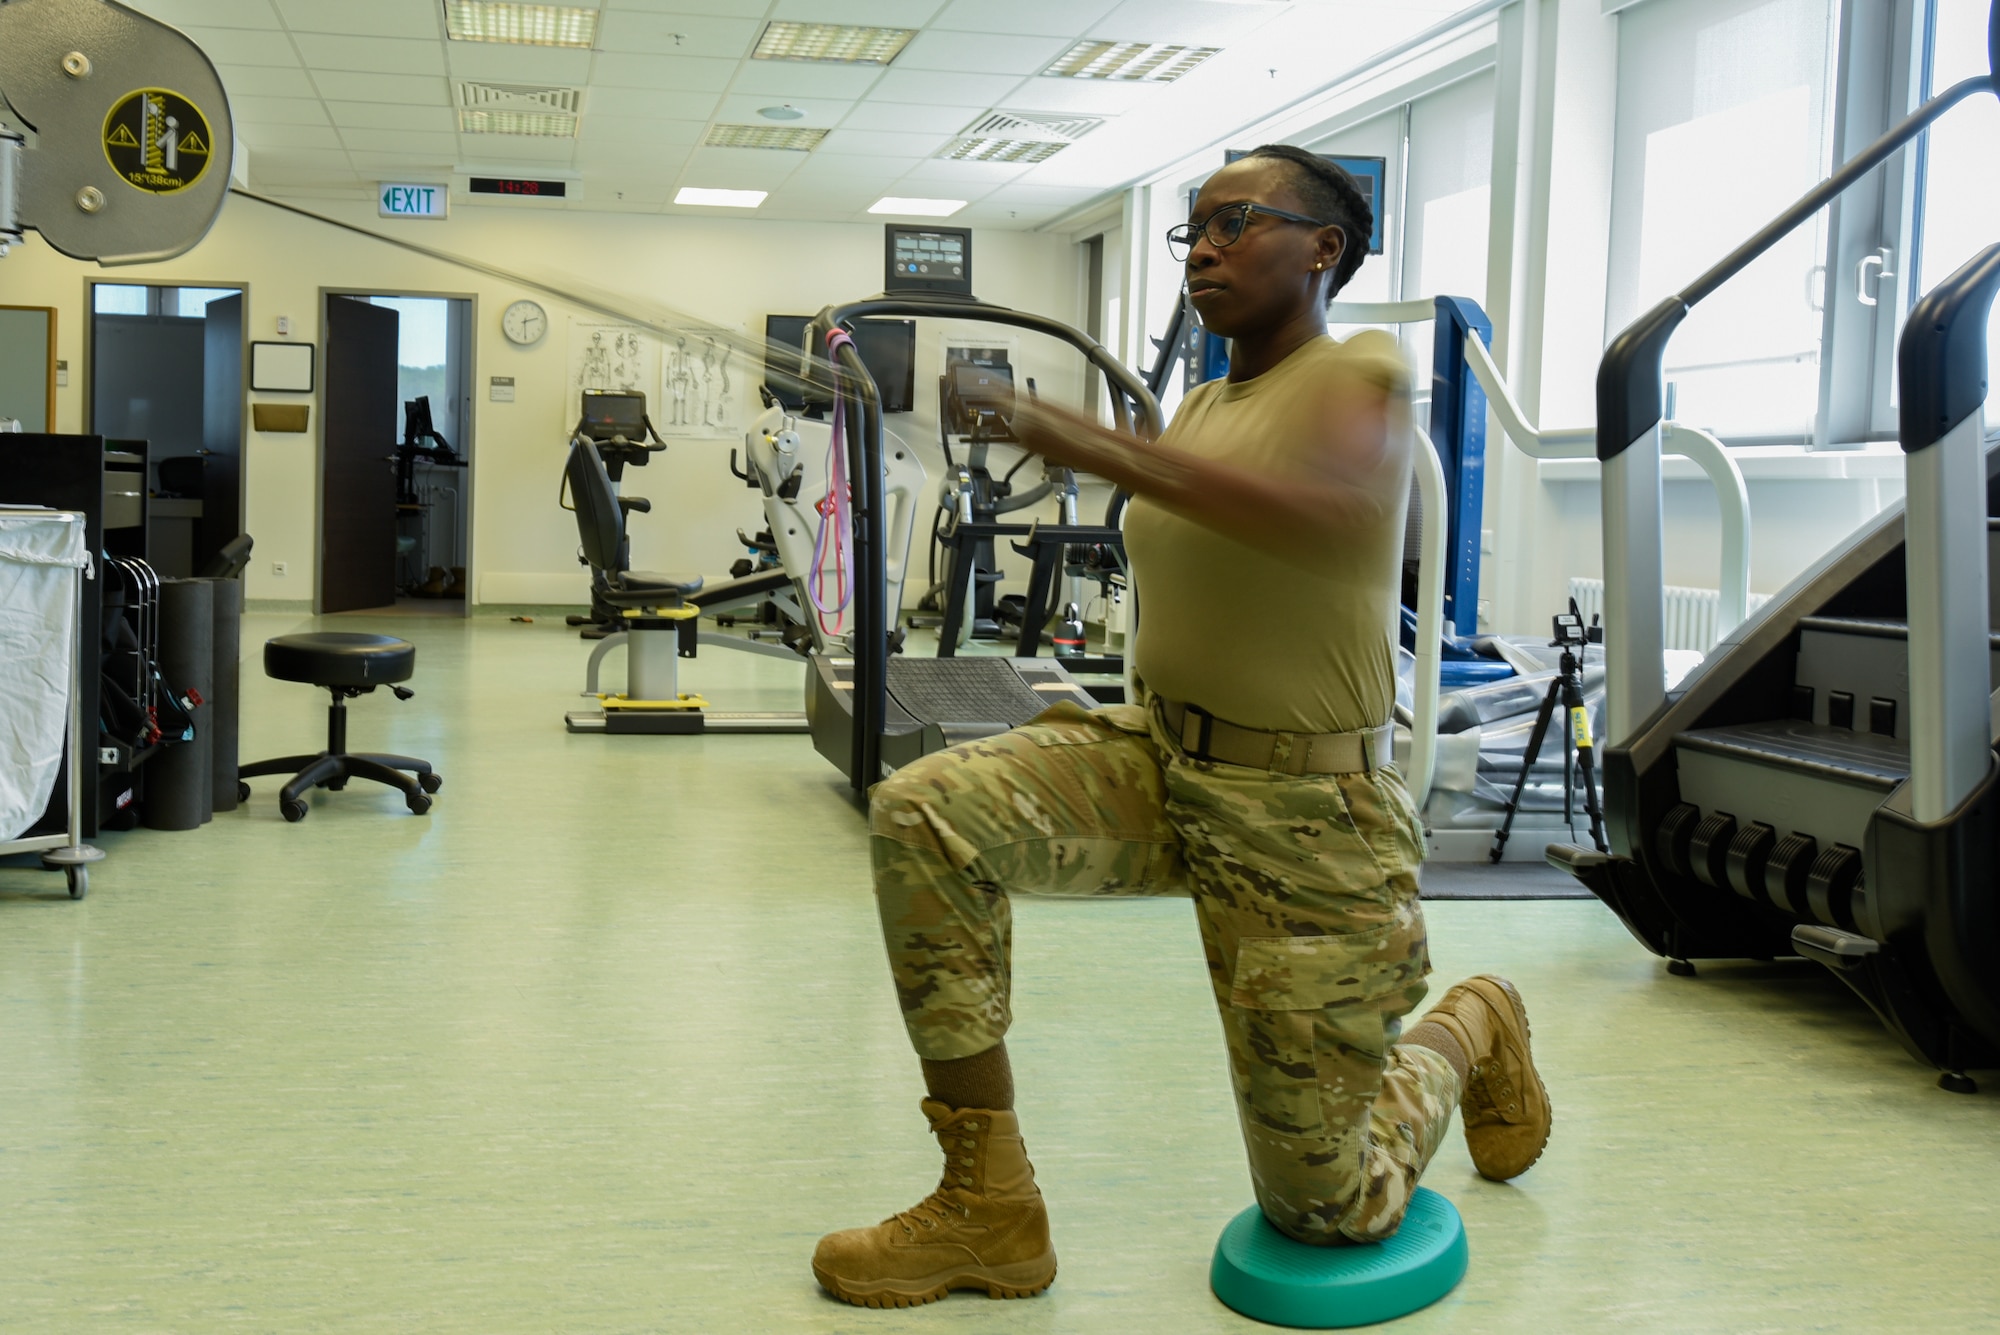 New medical profile system to enhance communication, readiness > Air Force > Article Display